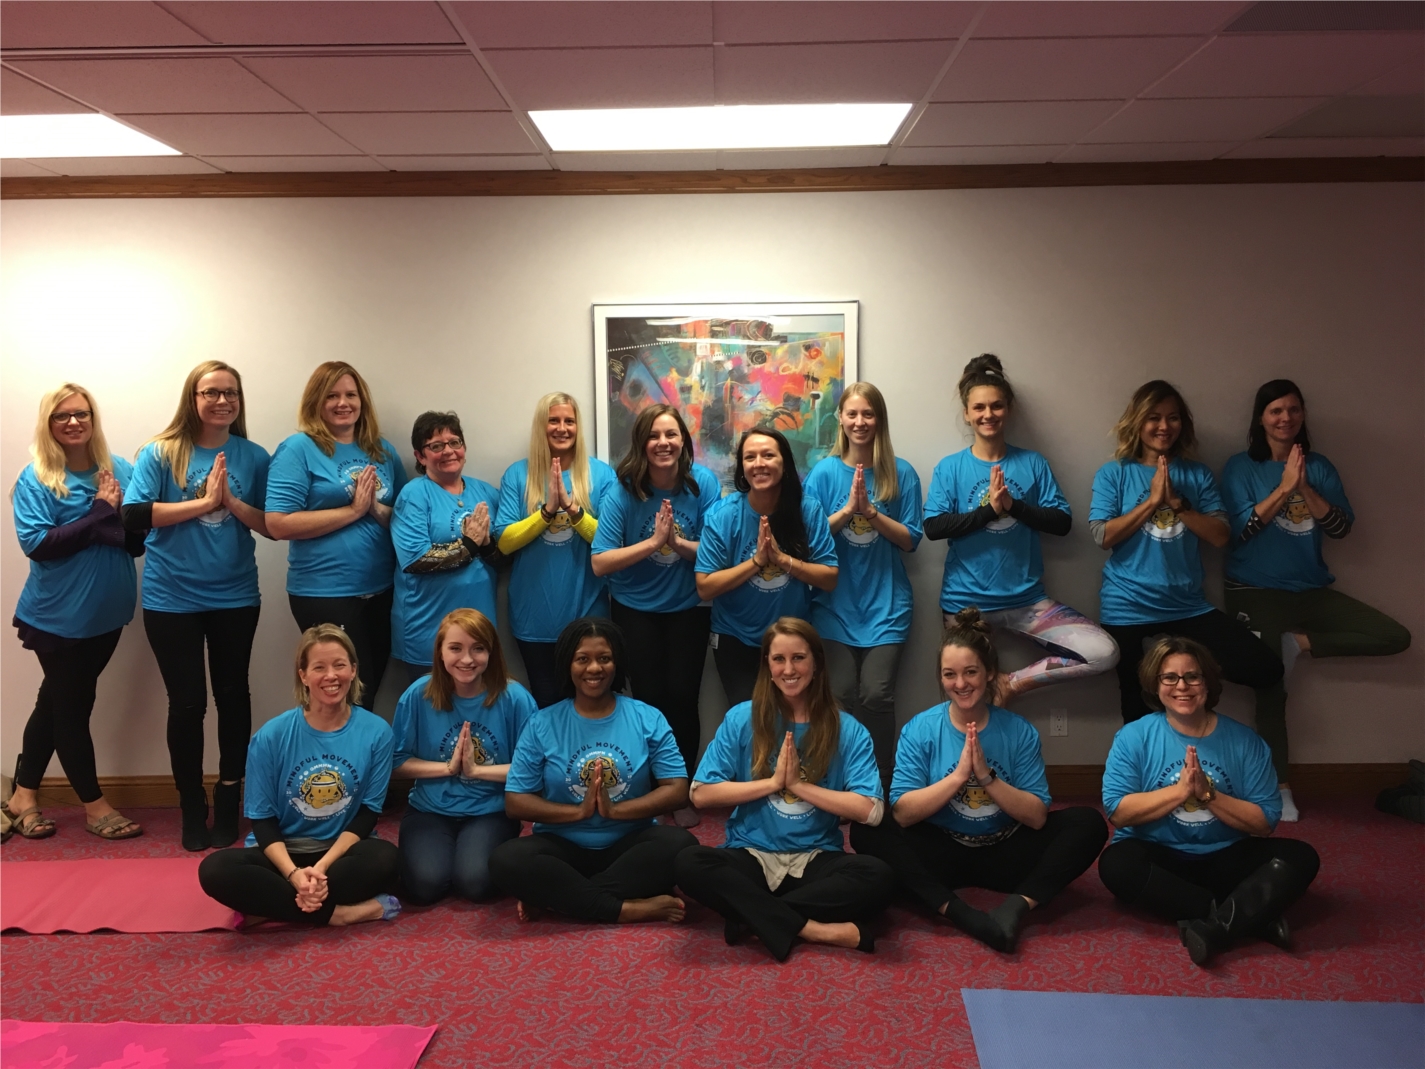 Posing for a photo after an on-site yoga session to celebrate "Mindful Movement."